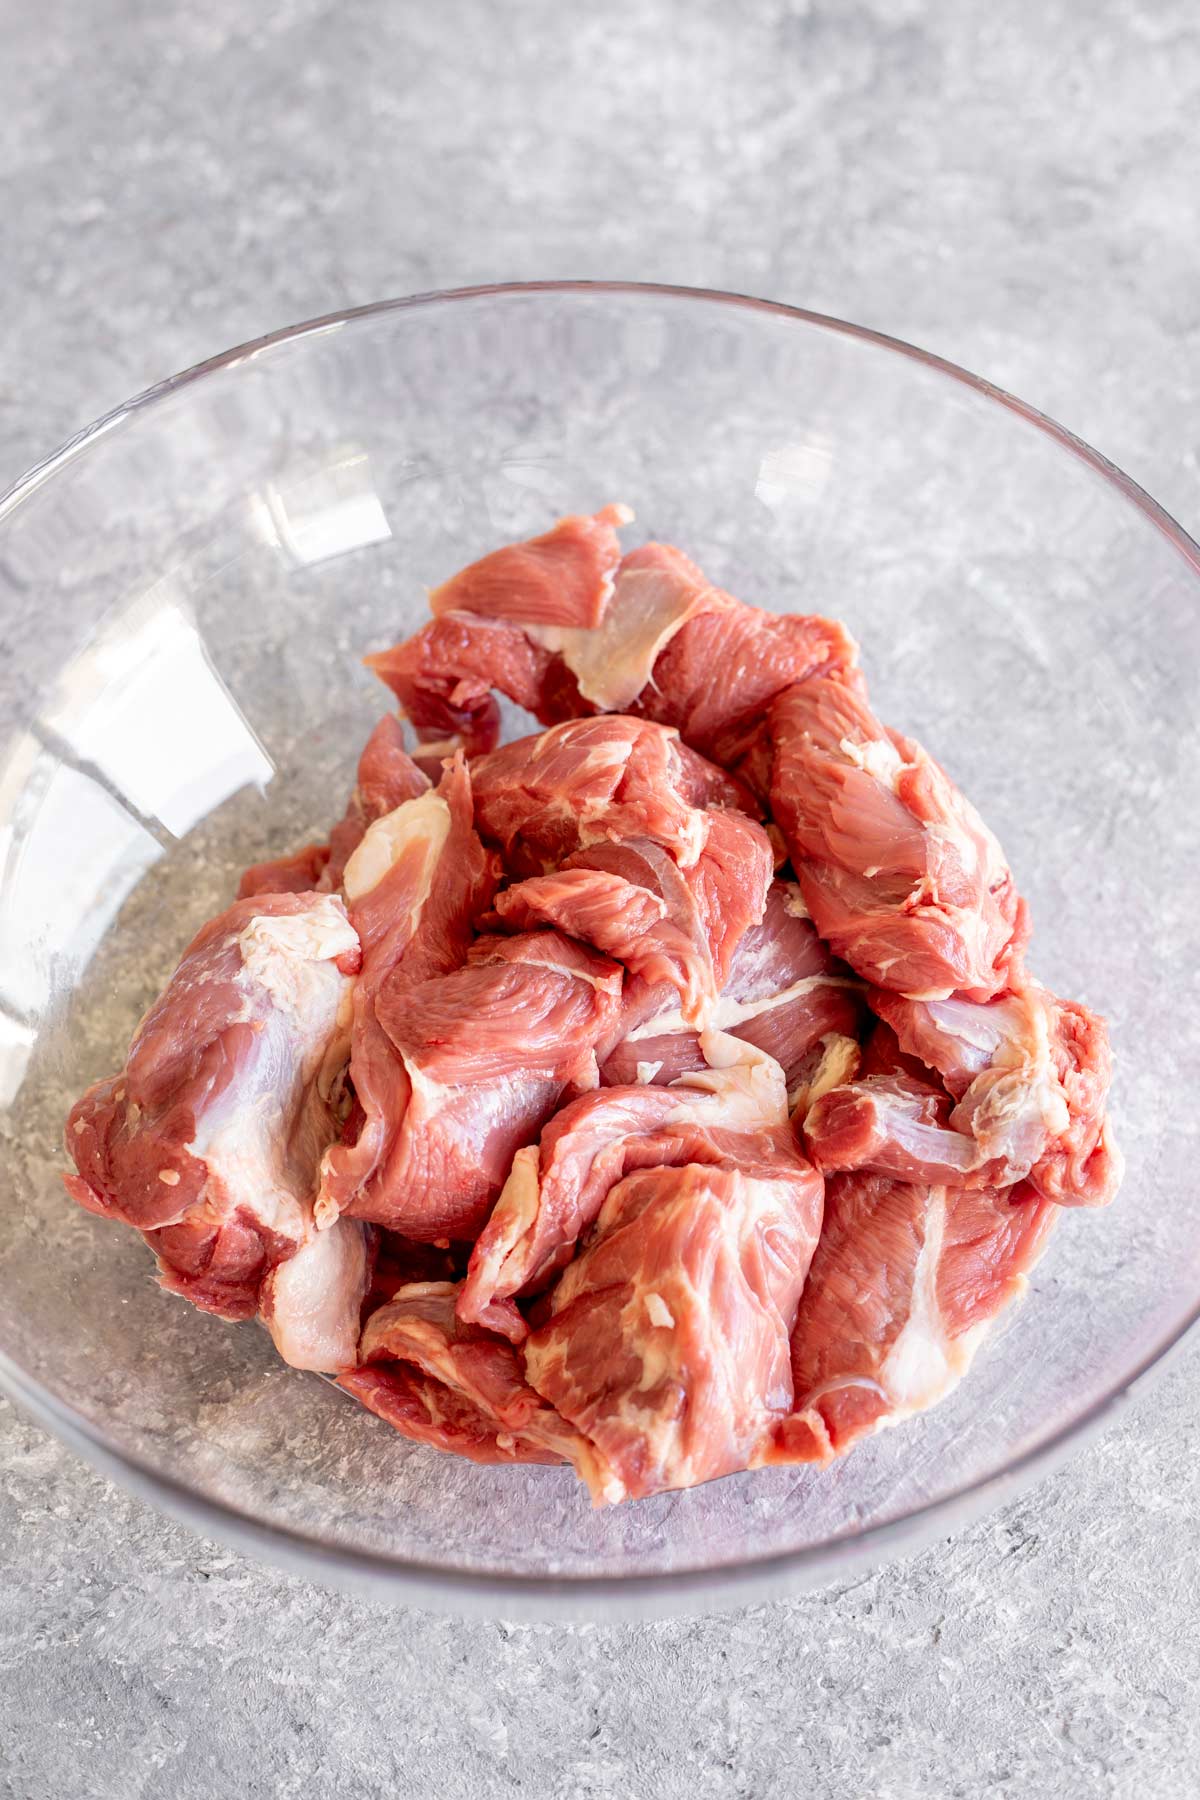 large chunks of raw lamb in a glass bowl on a stone table